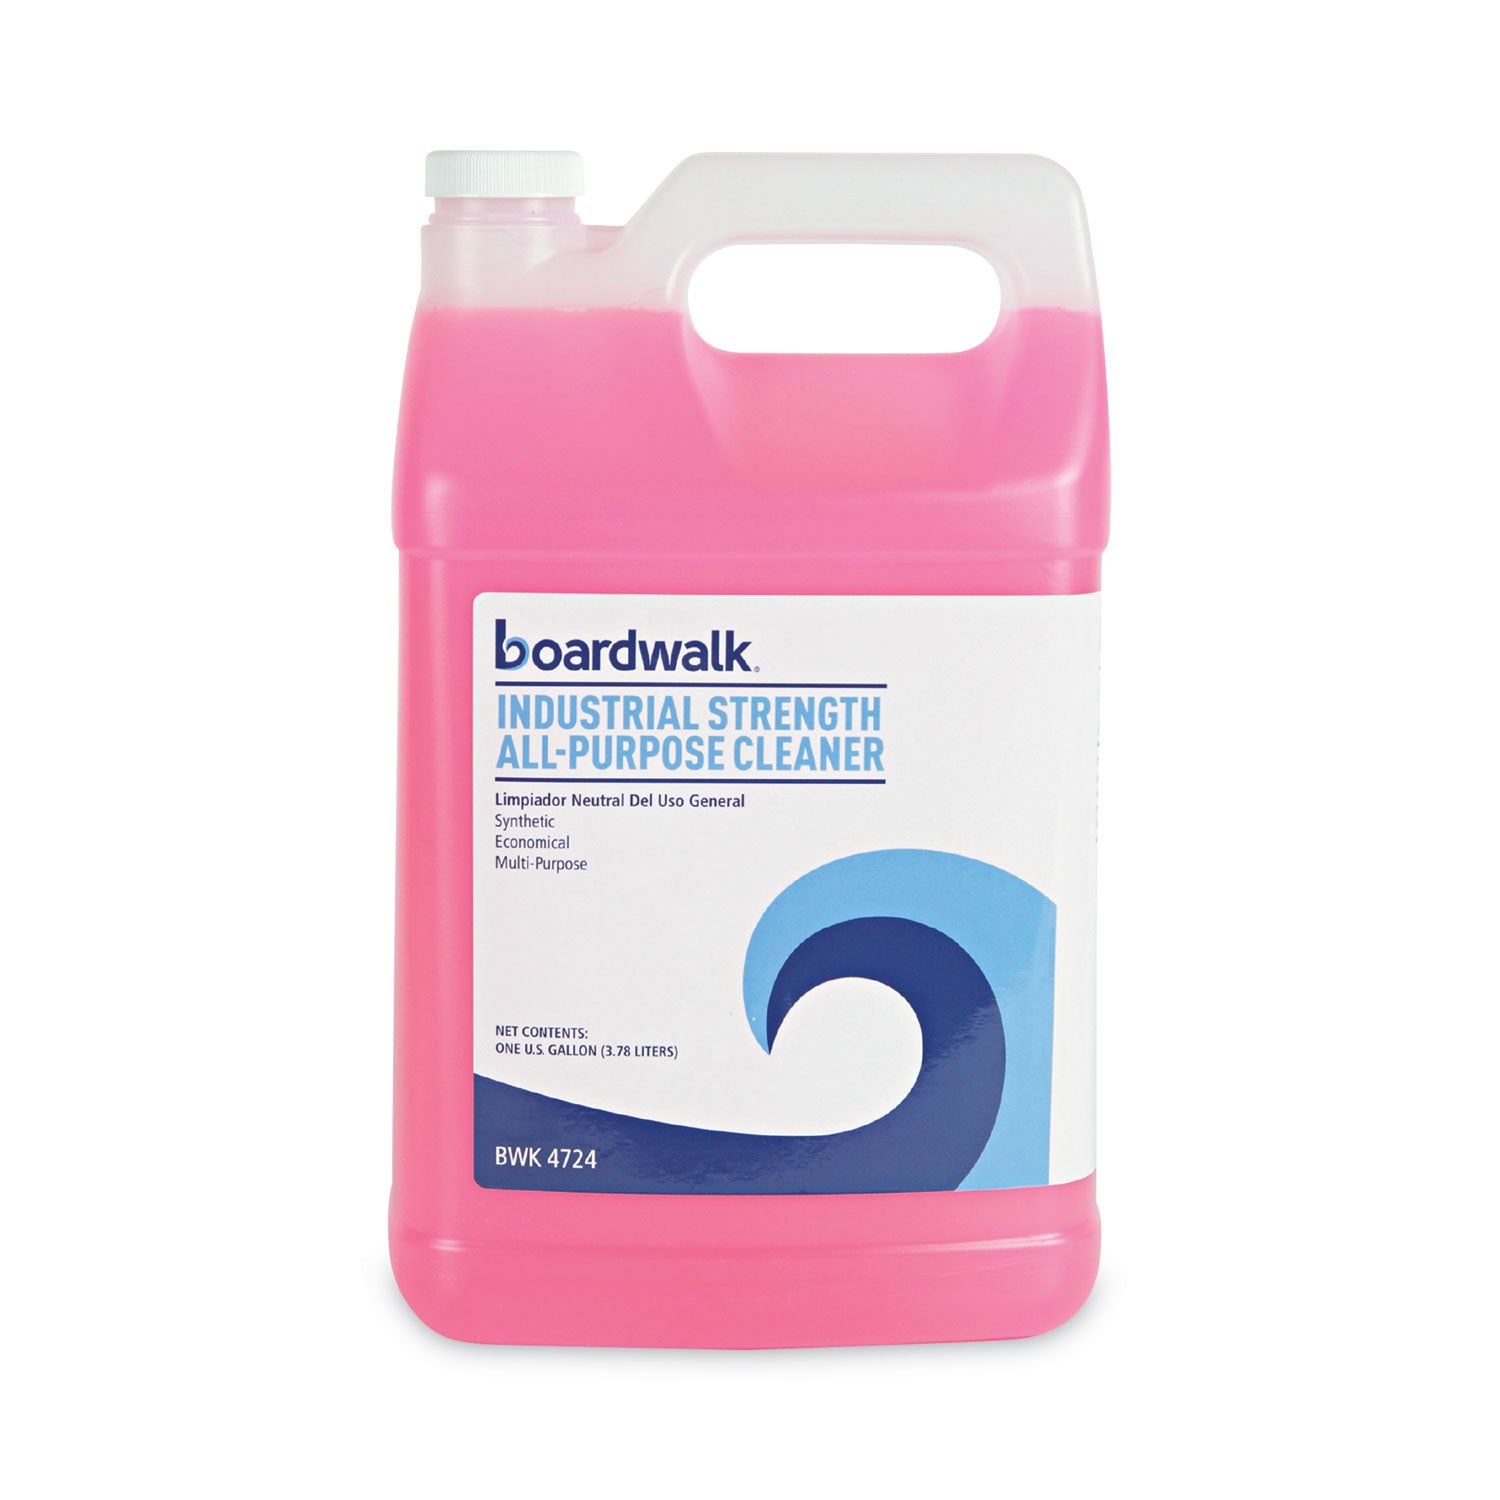 industrial-strength-all-purpose-cleaner-unscented-1-gal-bottle_bwk4724ea - 1